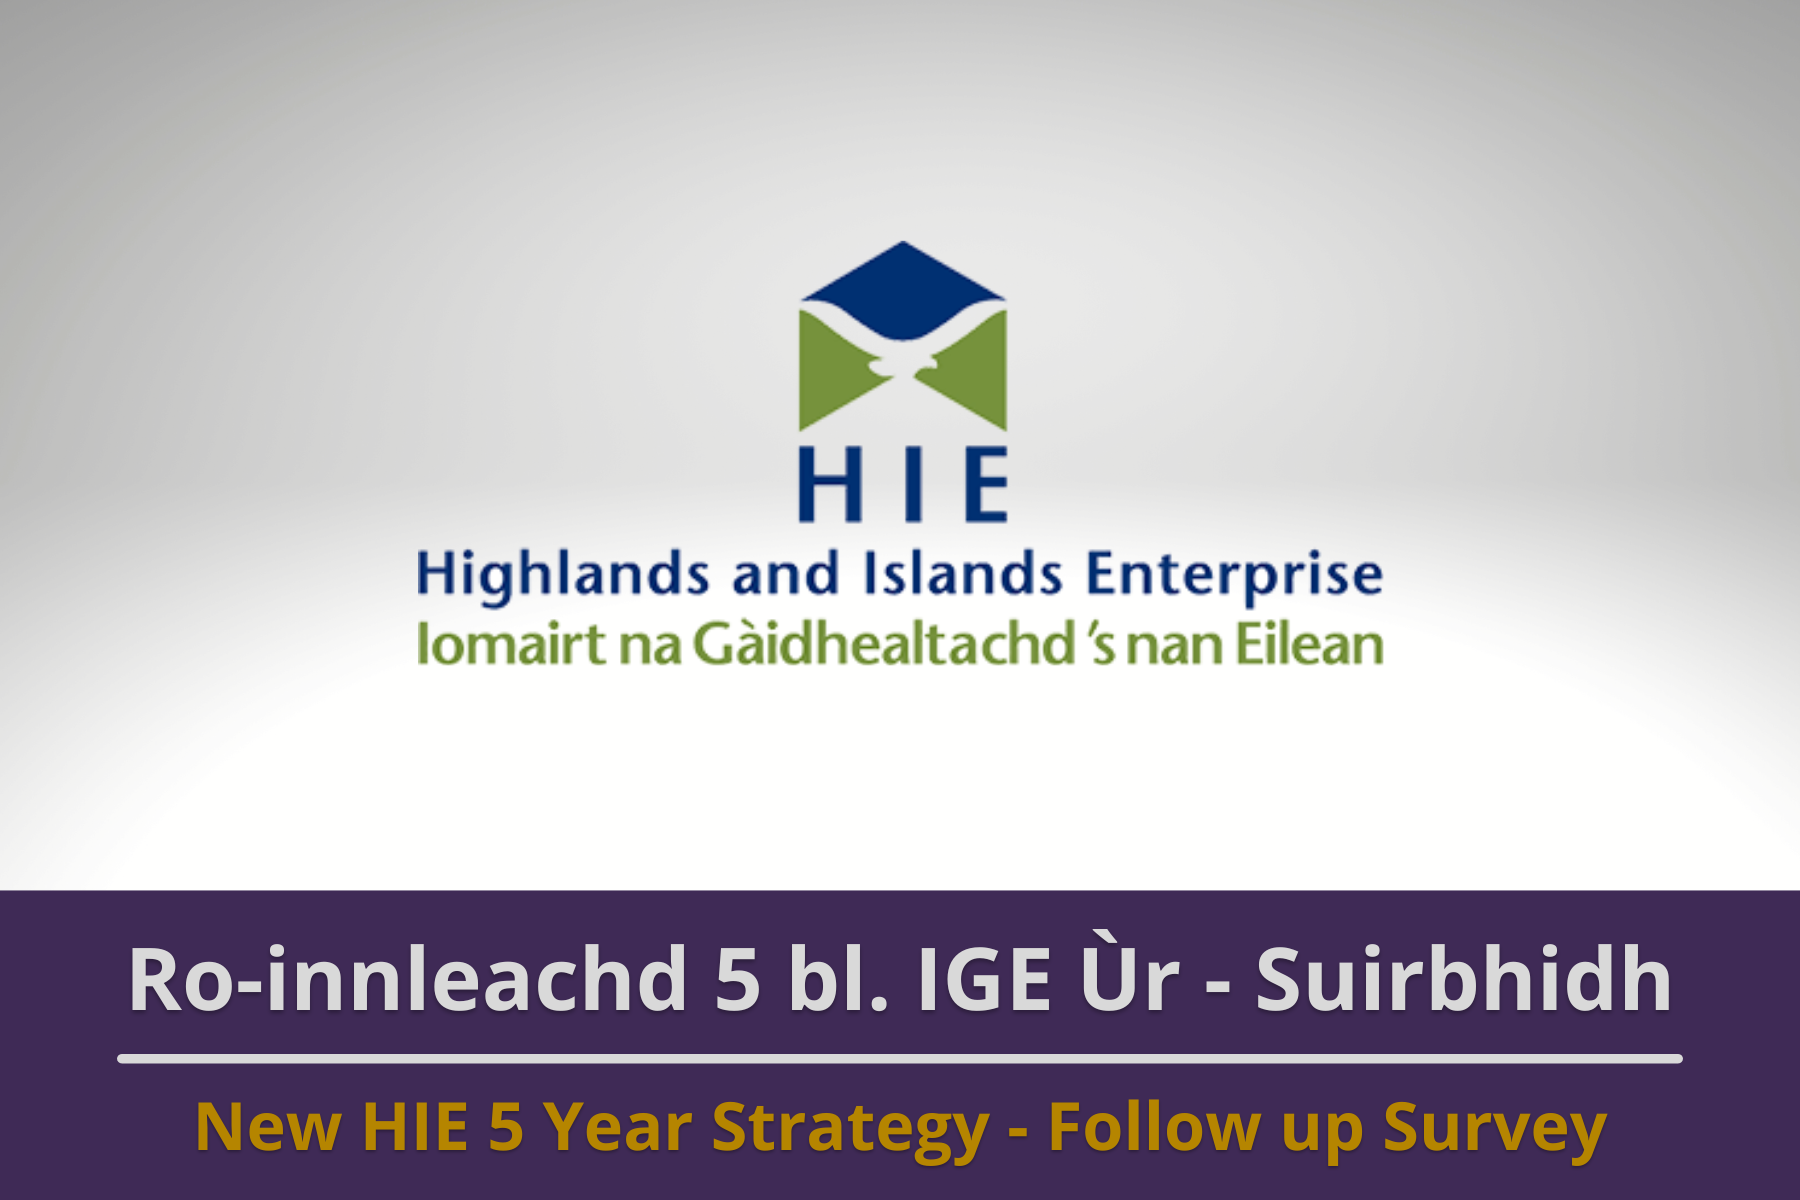 Response to HIE 5 Year Strategy